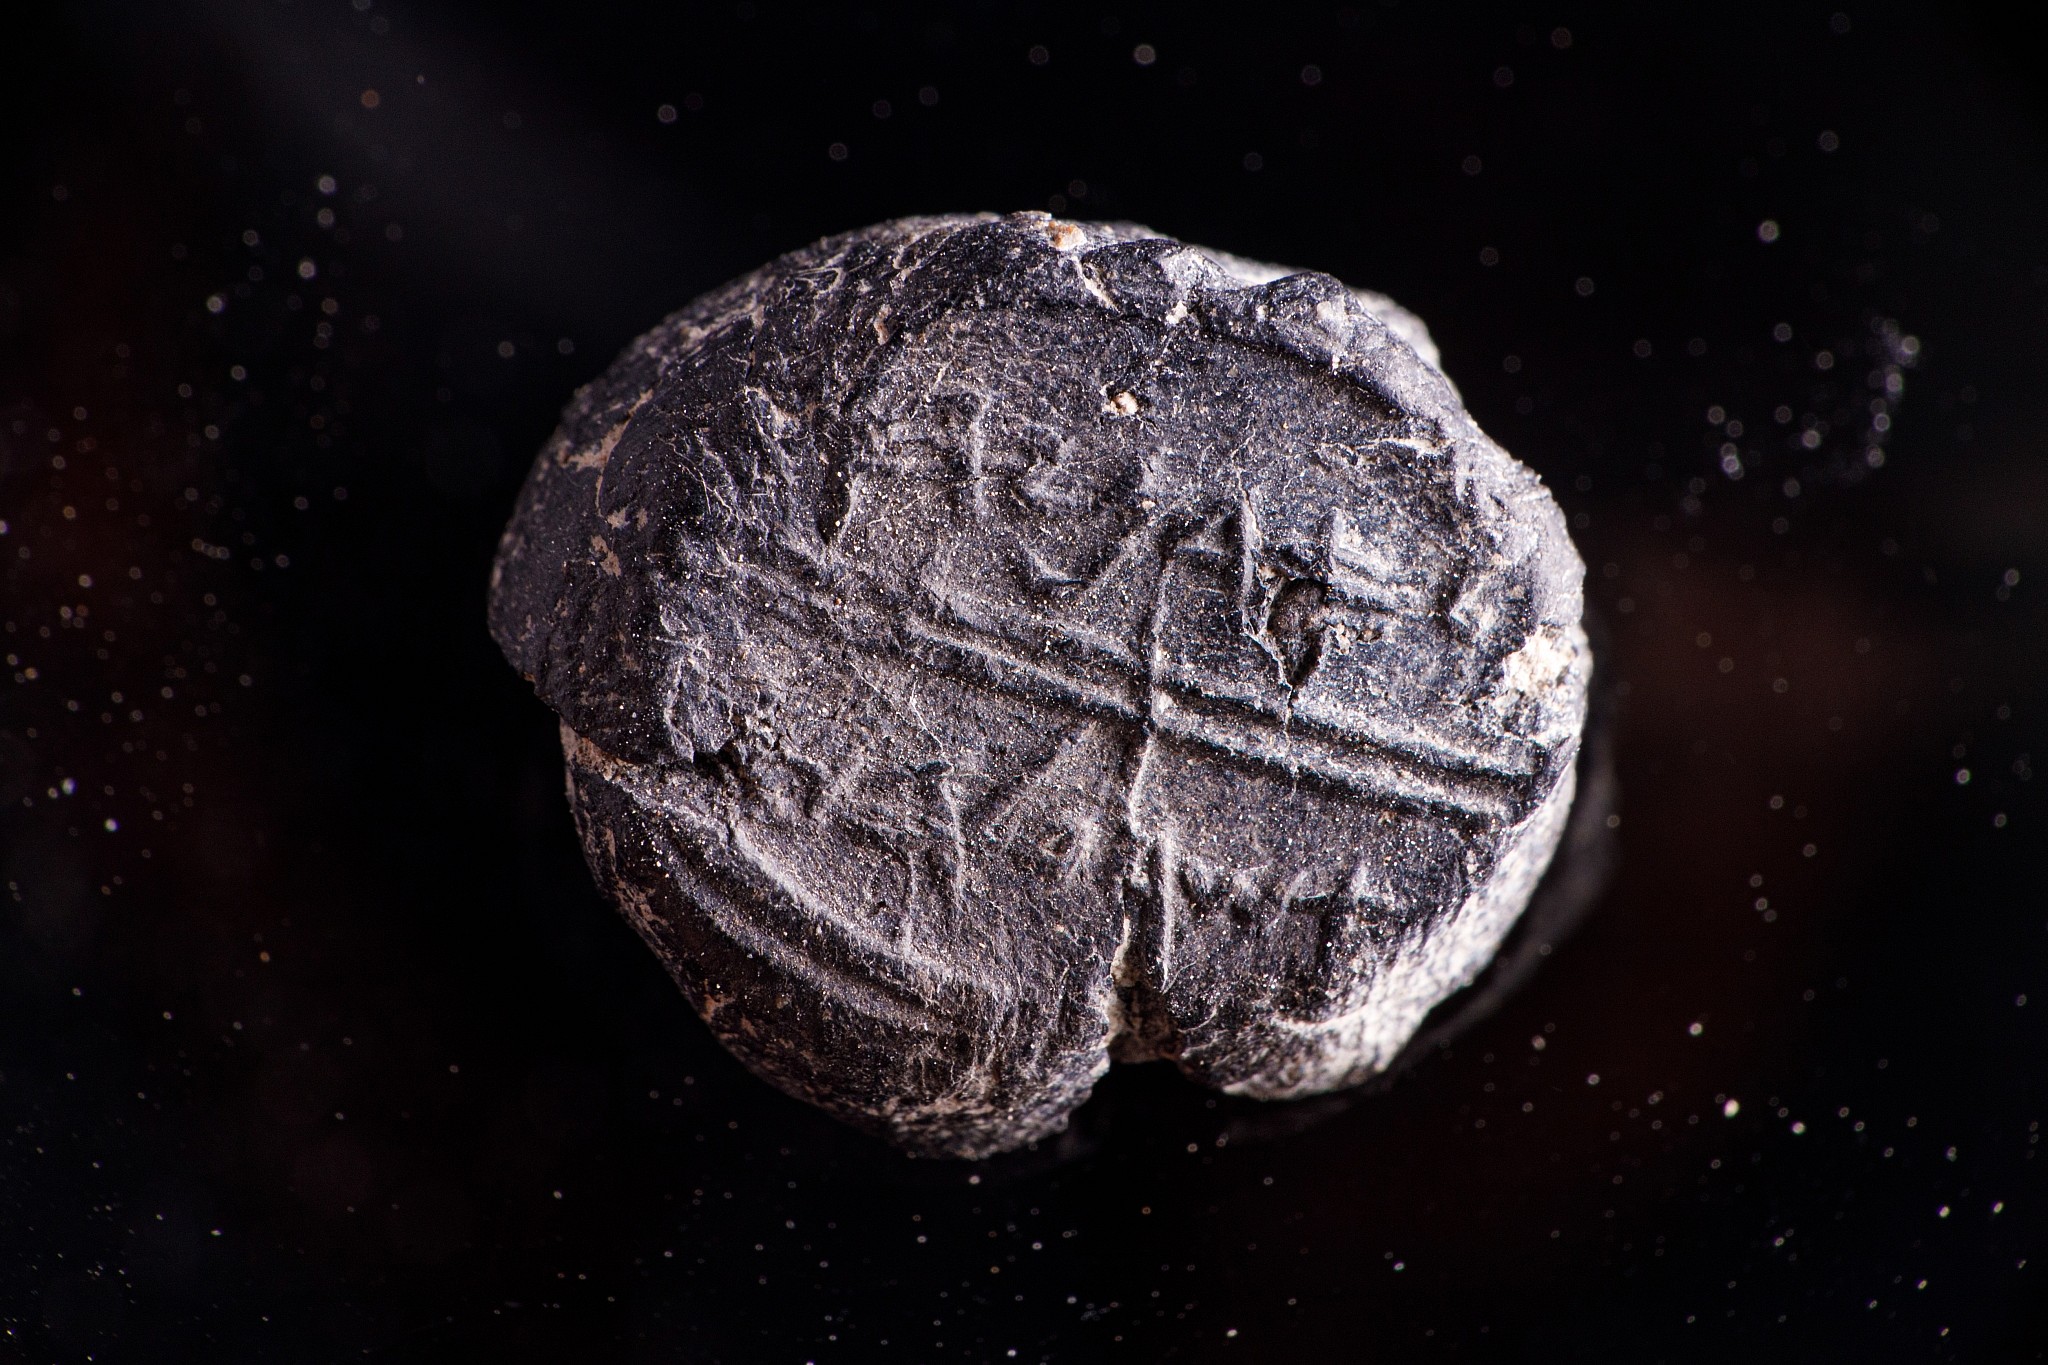 Tiny First Temple seal impression found with name of Bible-era royal  steward